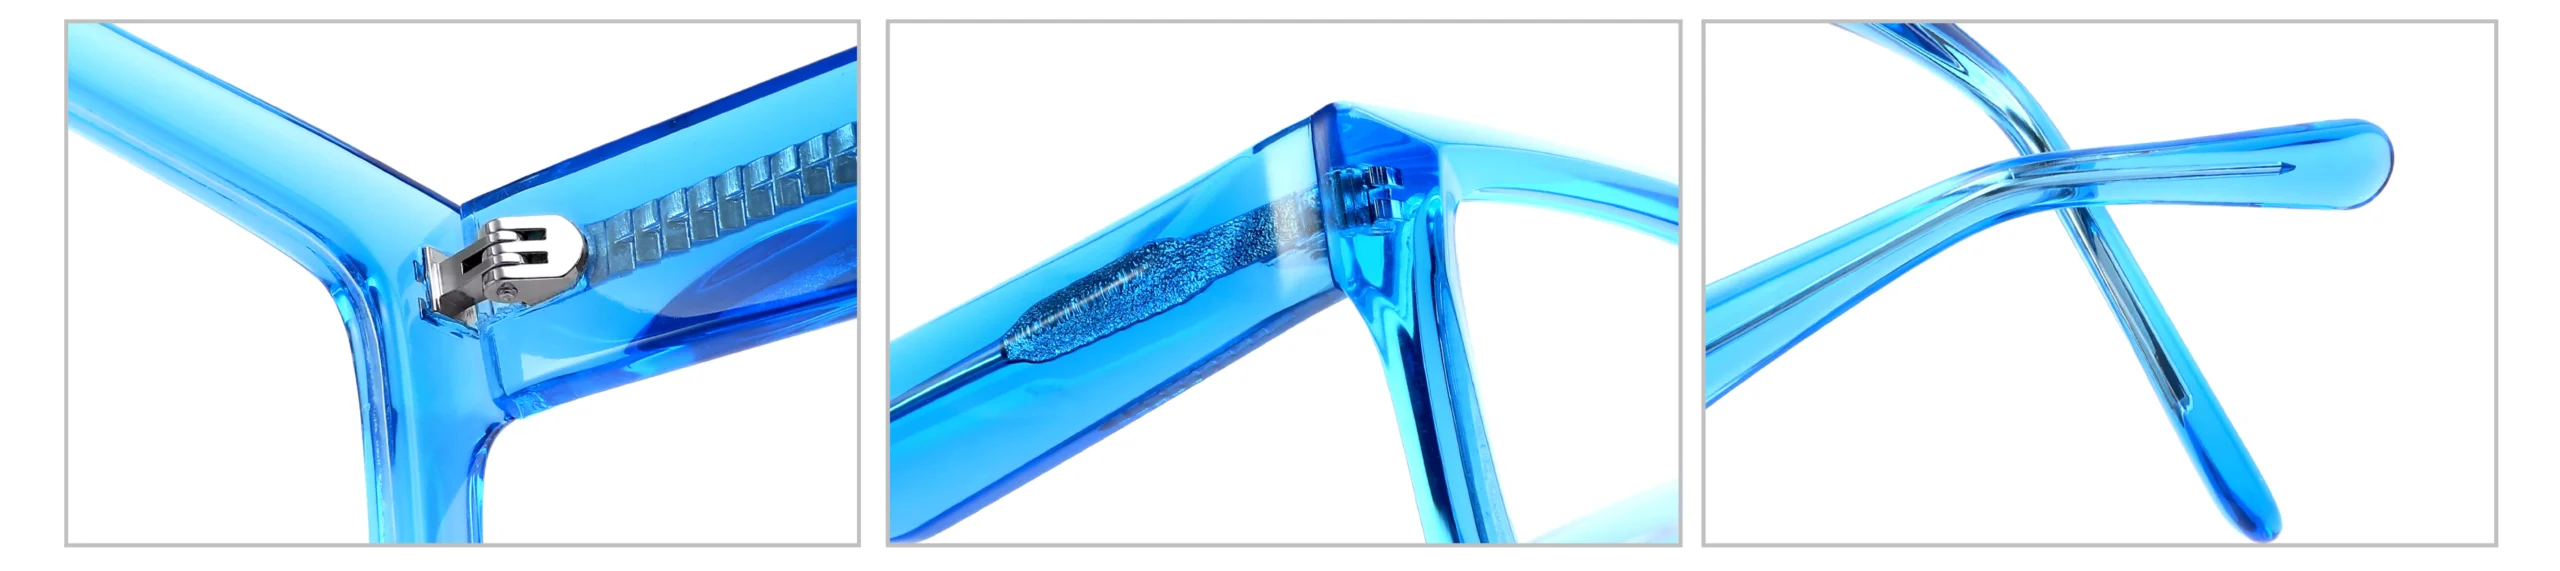 Glasses Frame YD1244 Detail Shooting, , hinge, stainless steel wire core, end pieces, temple tips